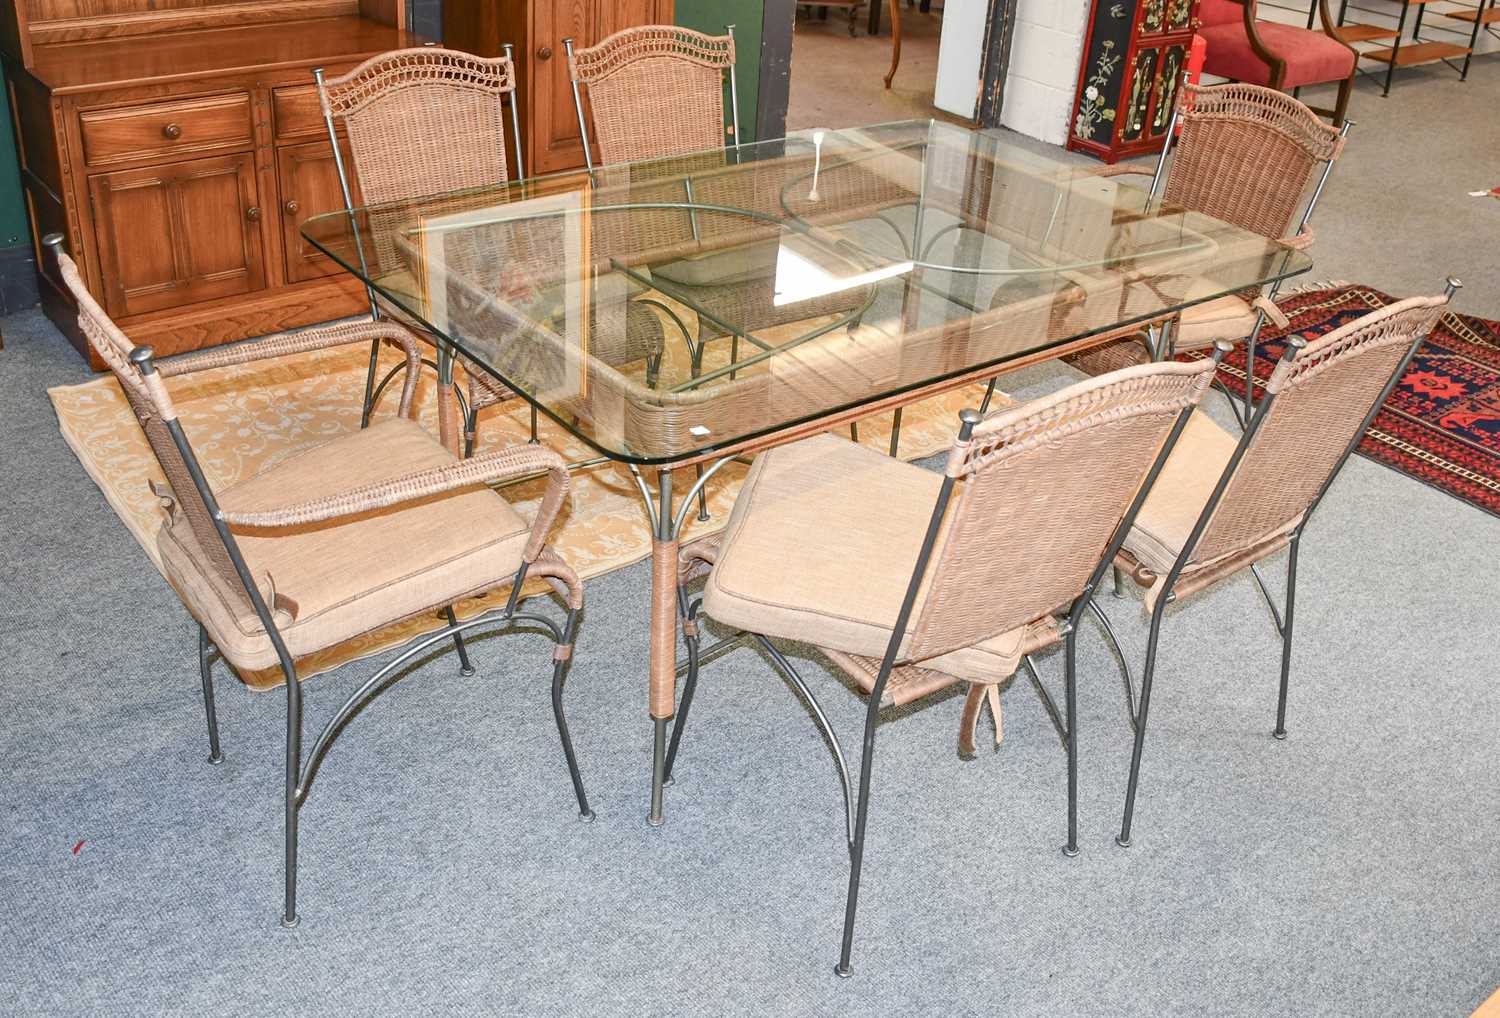 Modern Garden/Conservatory Furniture: a metal framed wicker three seater settee and matching